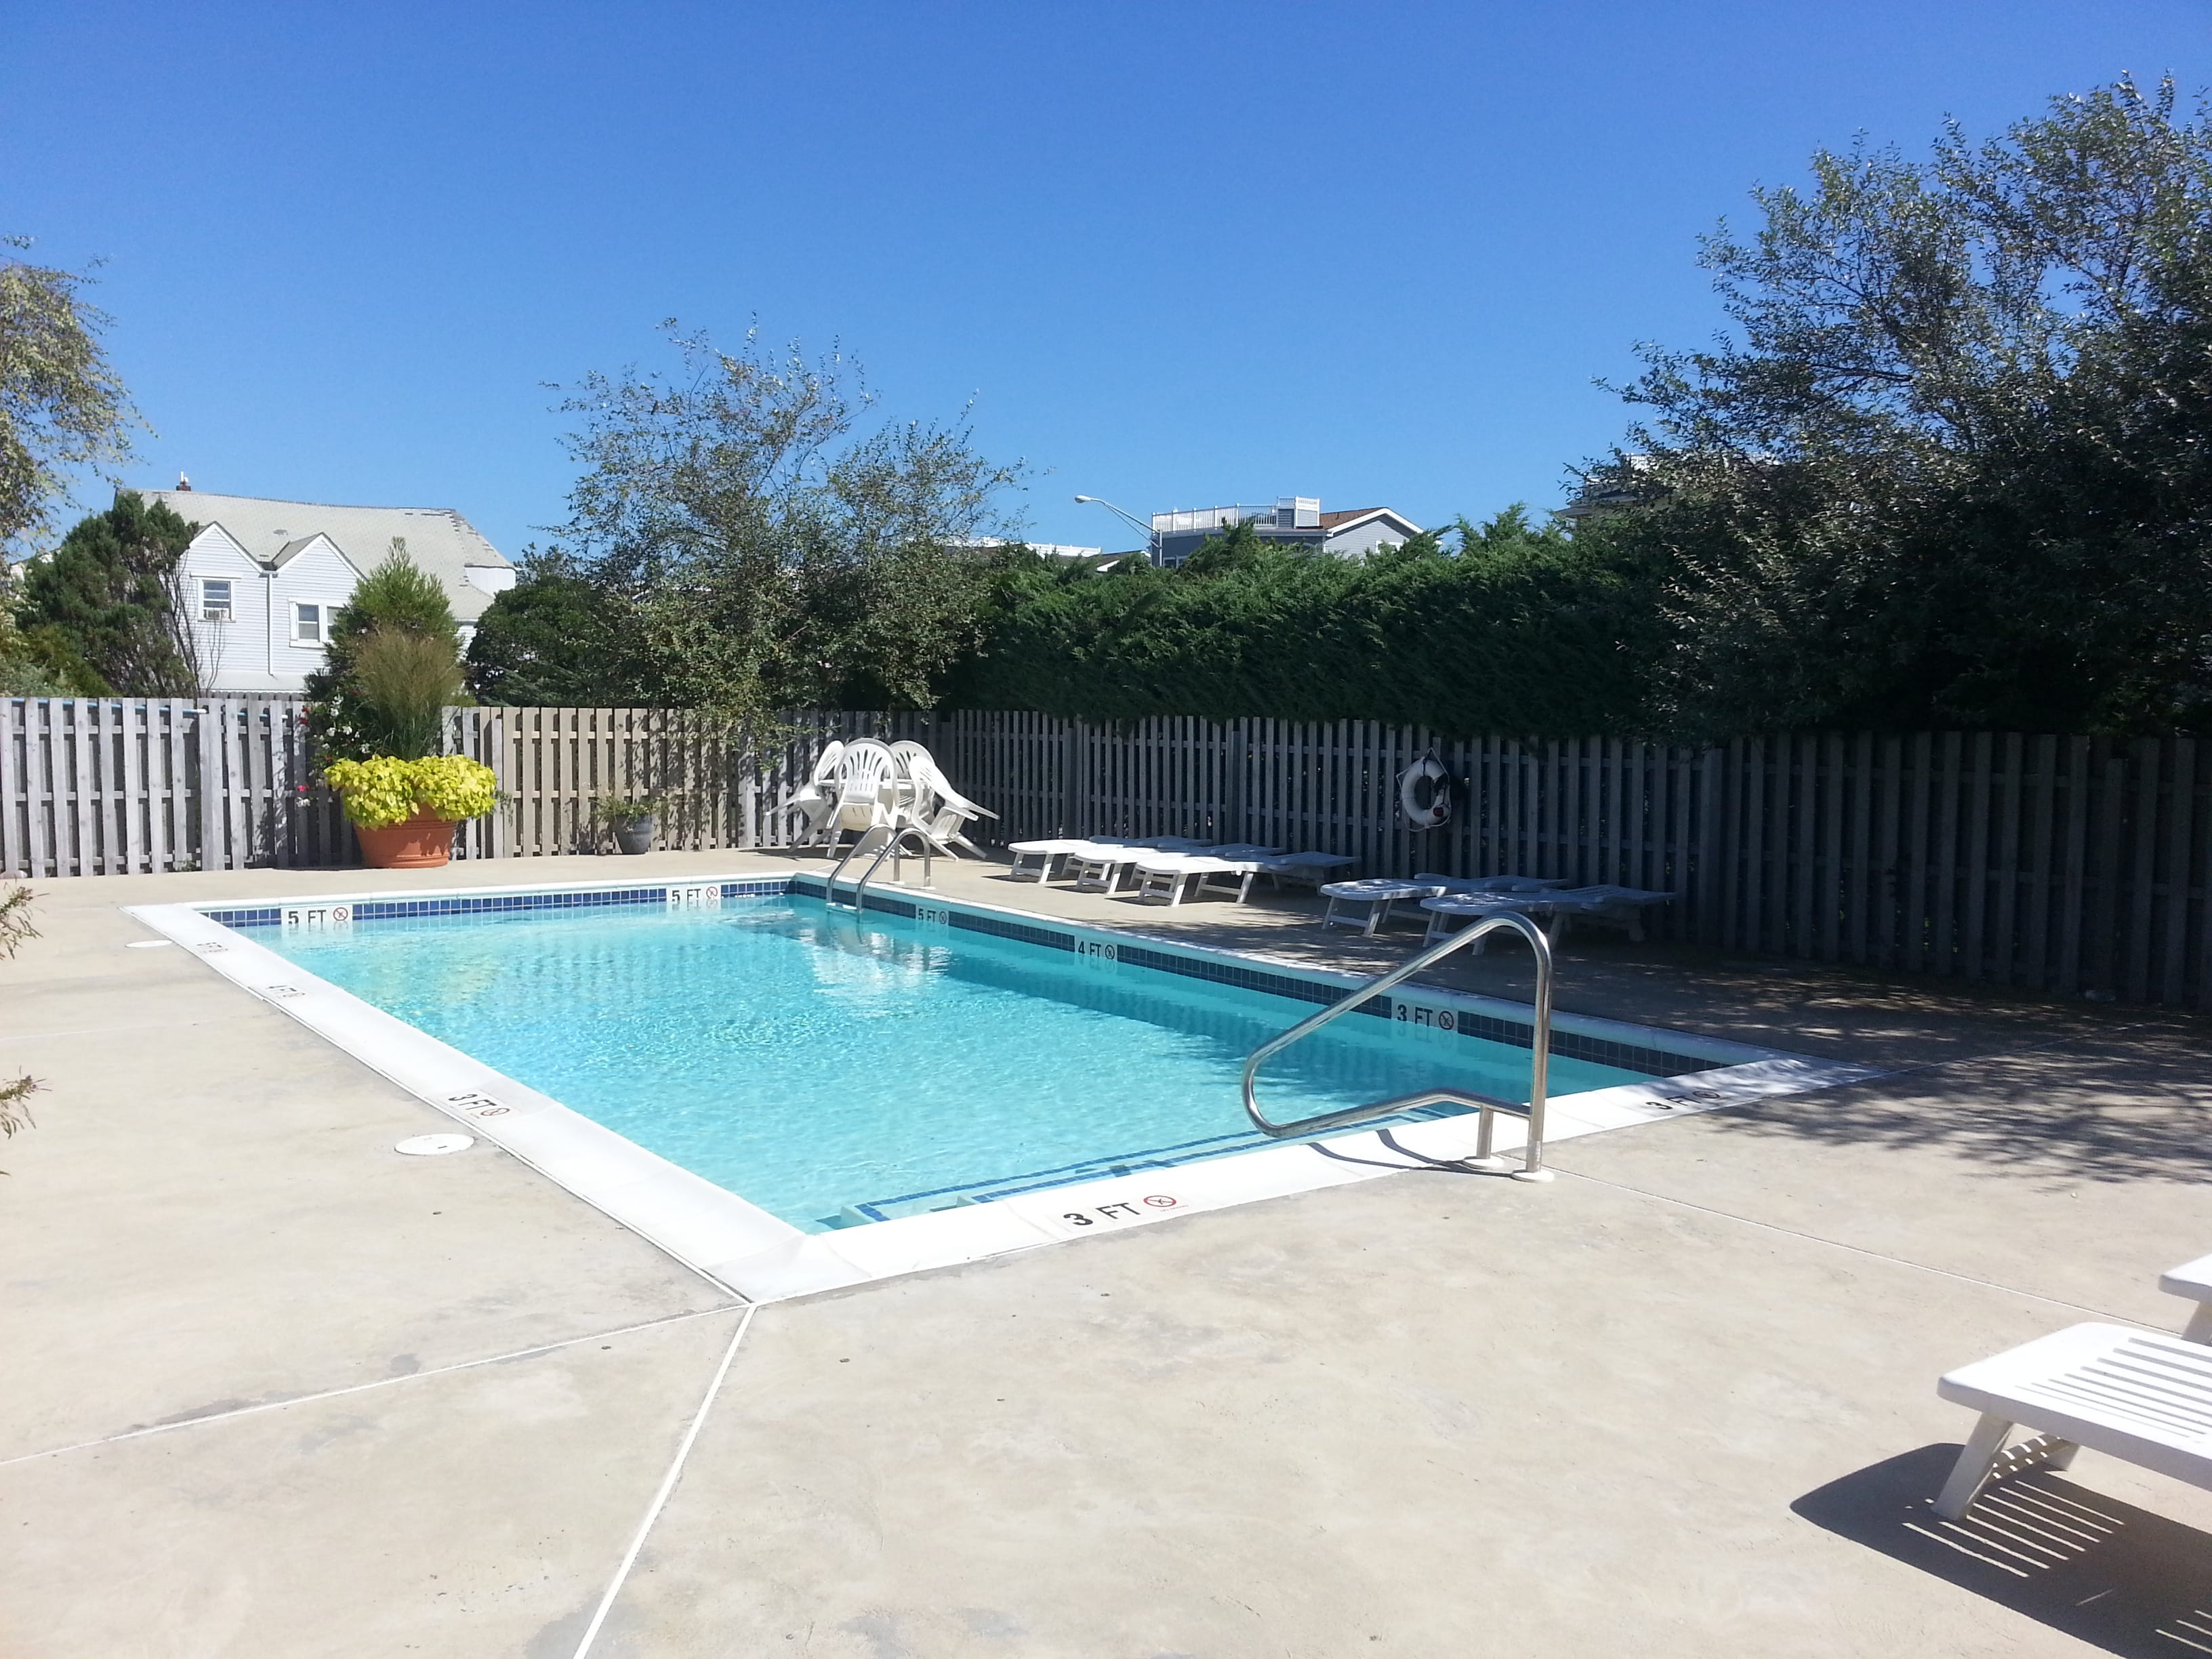 Among the amenities in Chris' Landing is this pool which is fenced and landscaped for privacy.